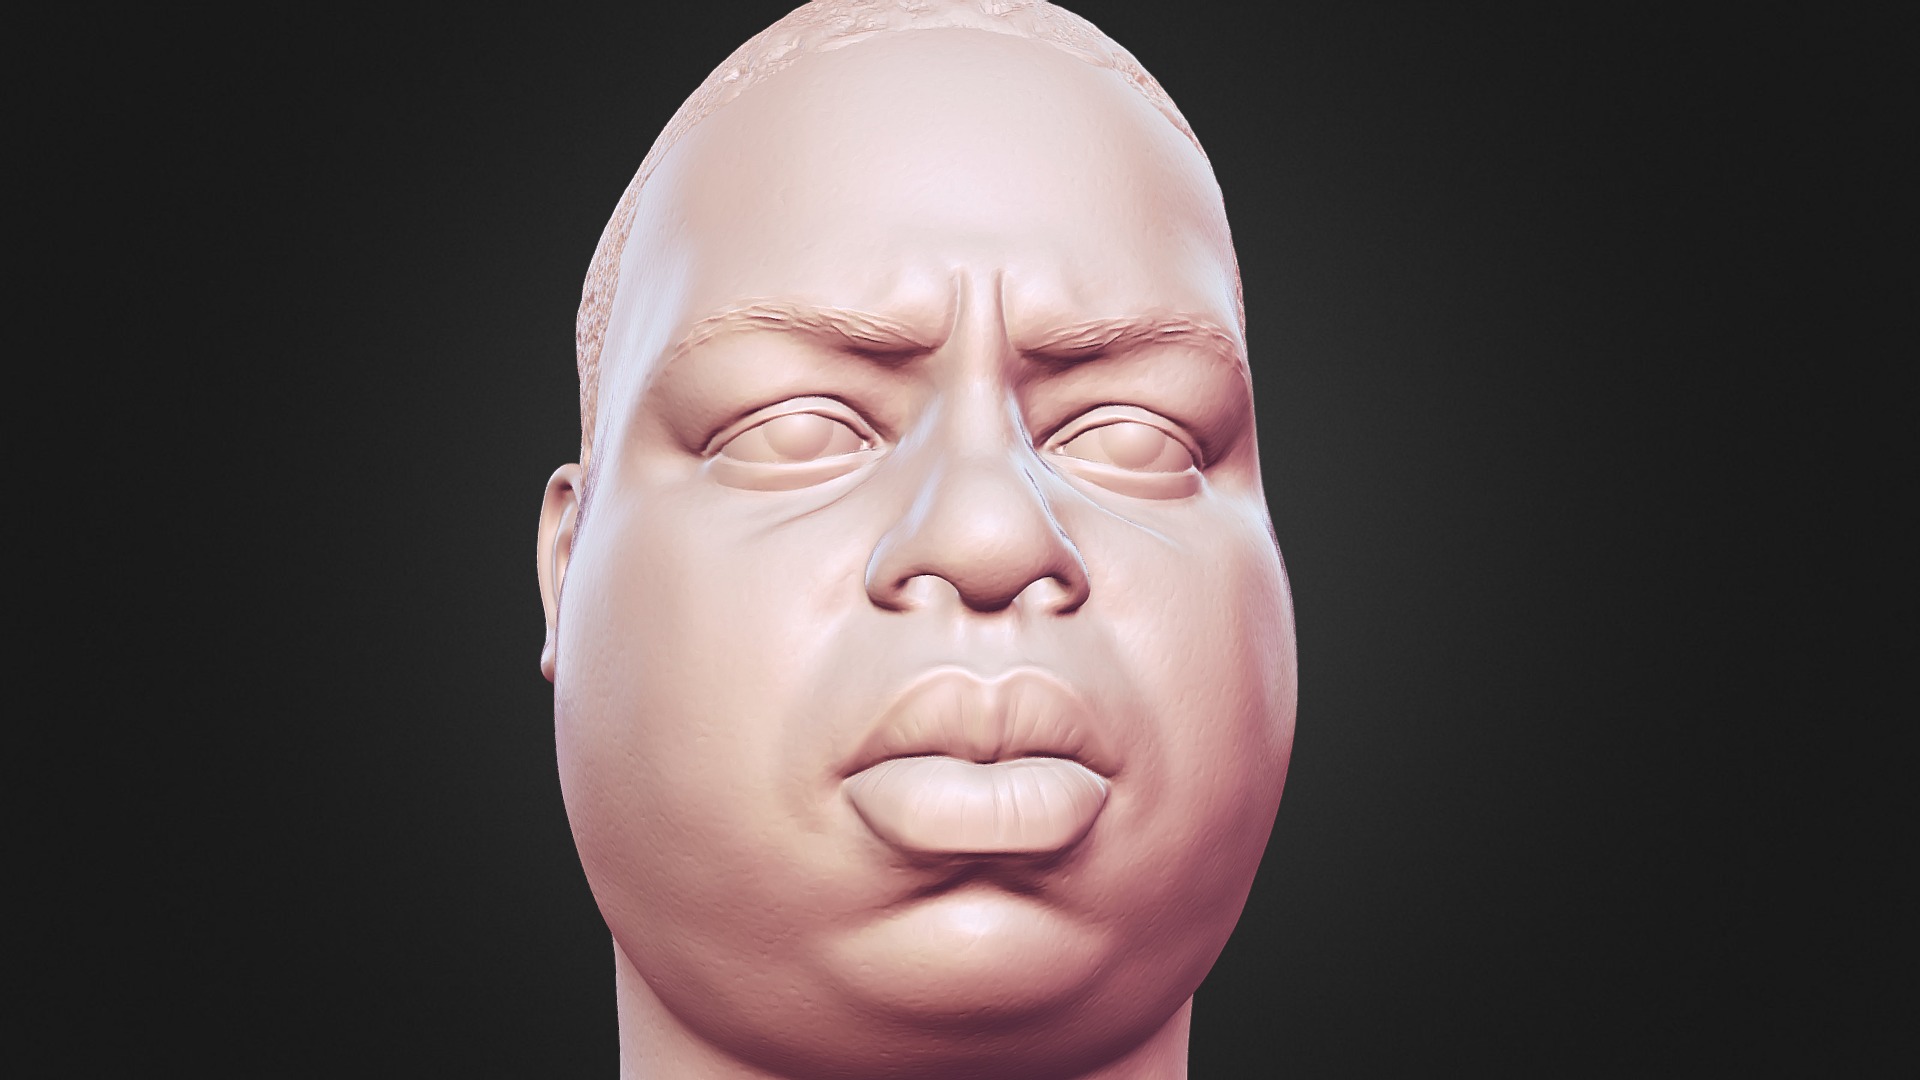 3D model Notorious B.I.G Biggie 3D printable portrait - This is a 3D model of the Notorious B.I.G Biggie 3D printable portrait. The 3D model is about a statue of a man with a white head covering.